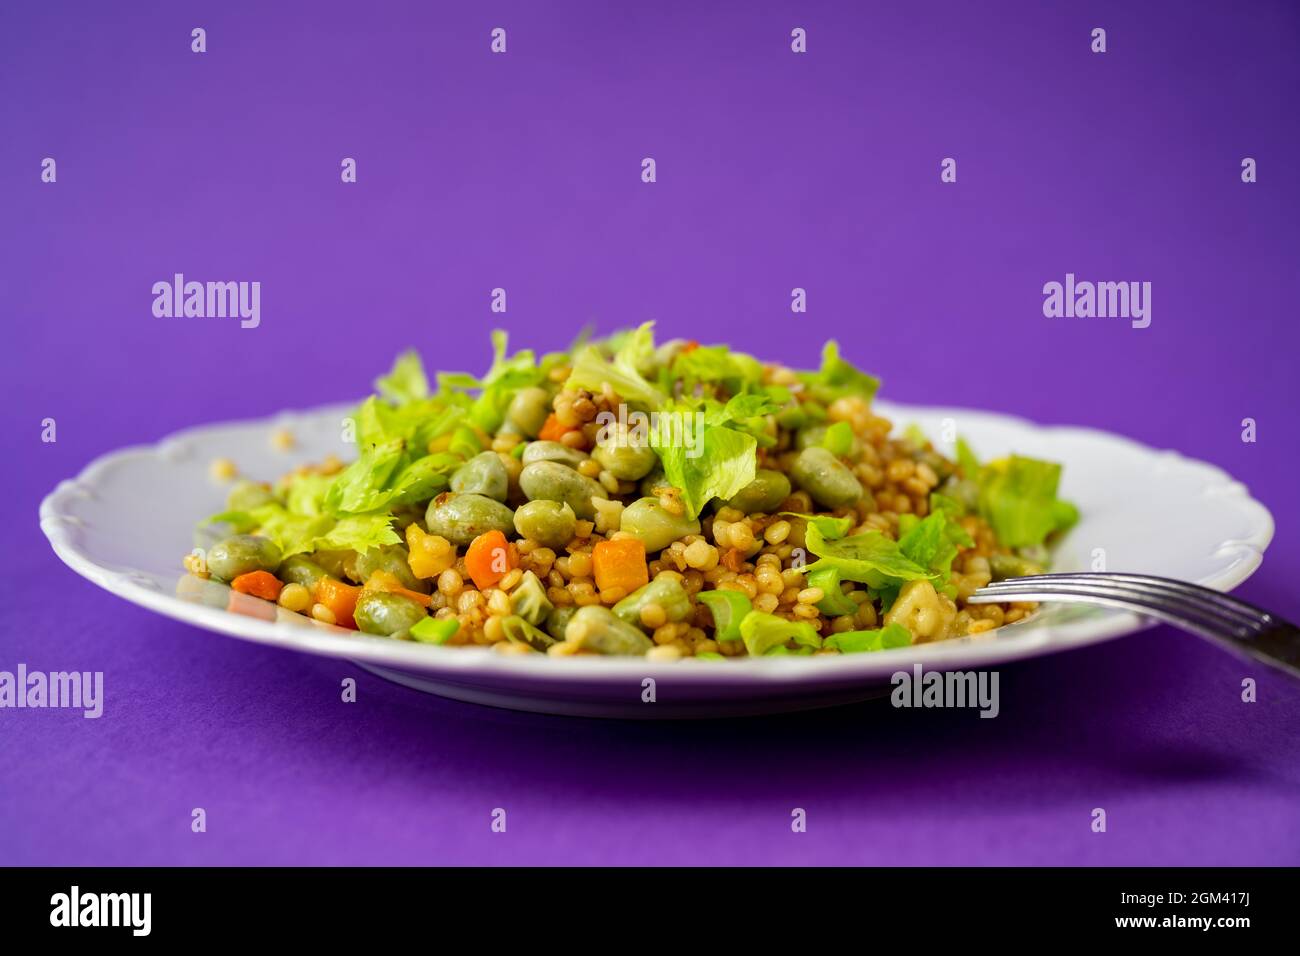 Fresh vegetarian meal from broad bean, lentil, carrot and celery shoot on white plate with fork on purple background, closeup. Stock Photo